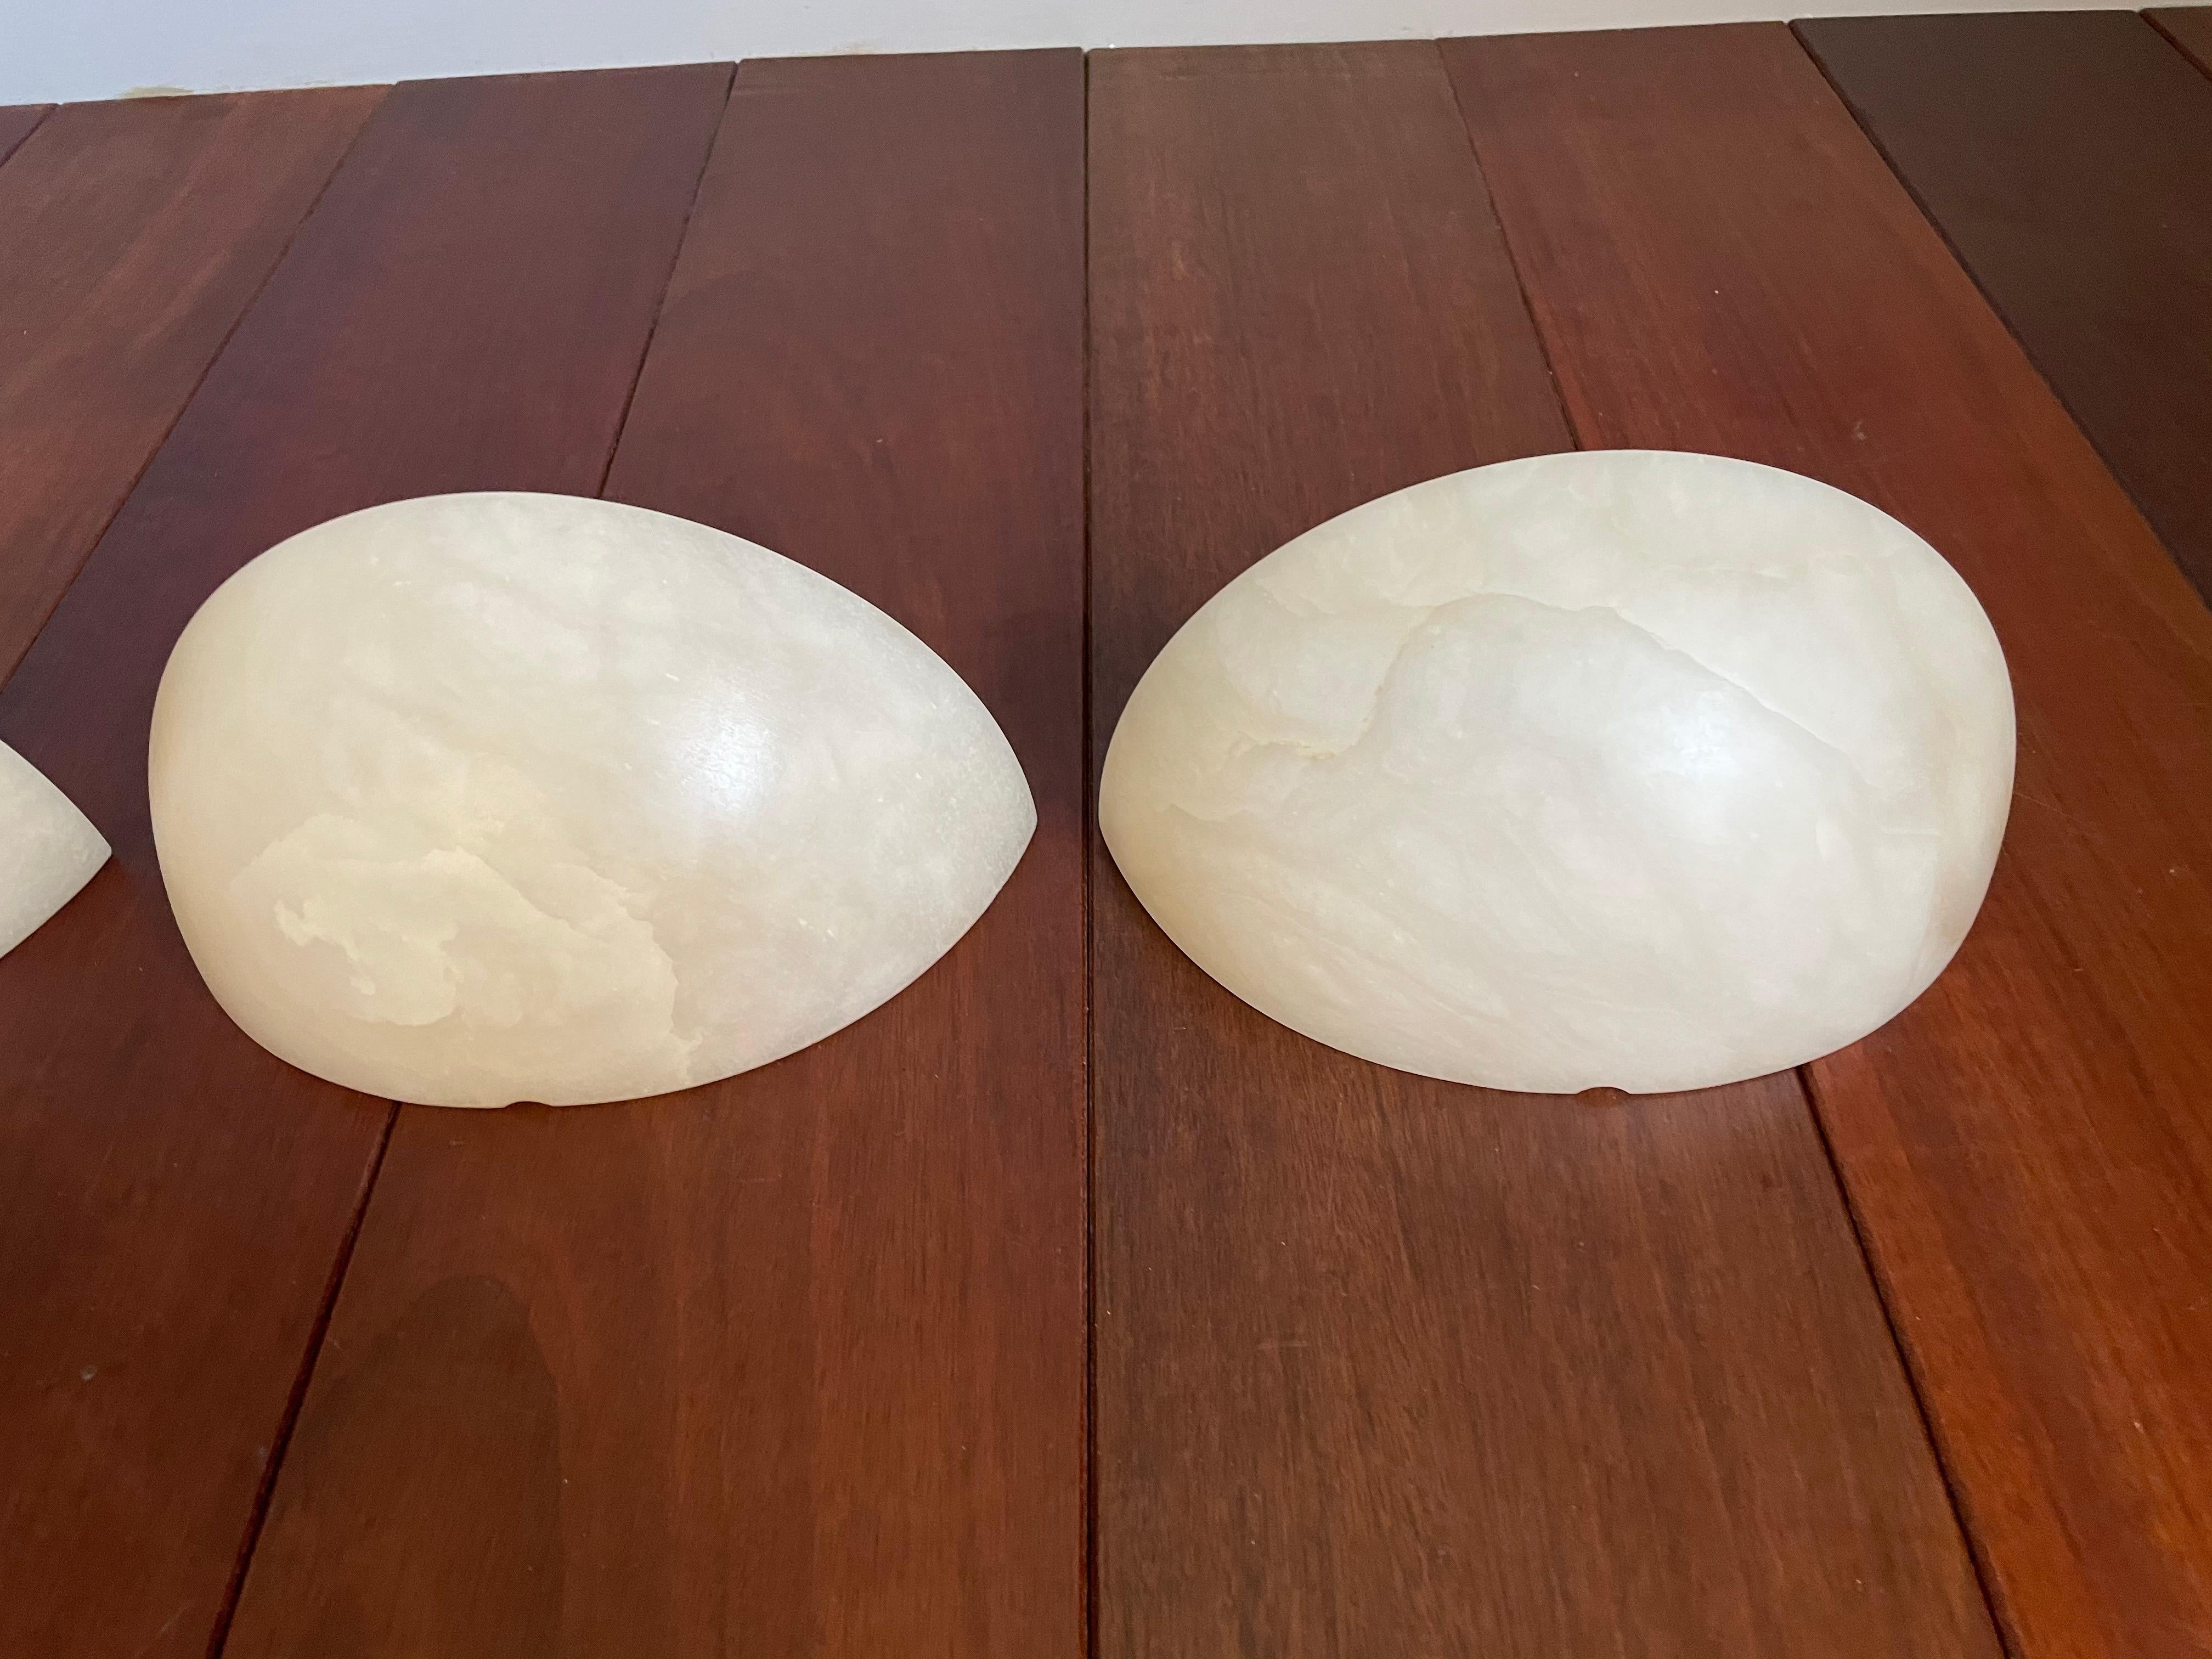 Ideal collection of 4 alabaster wall lamps for a project.

Because of their timeless designs and warm light creating qualities, we have owned and sold many alabaster light fixtures. There is something about the look and feel of these alabaster